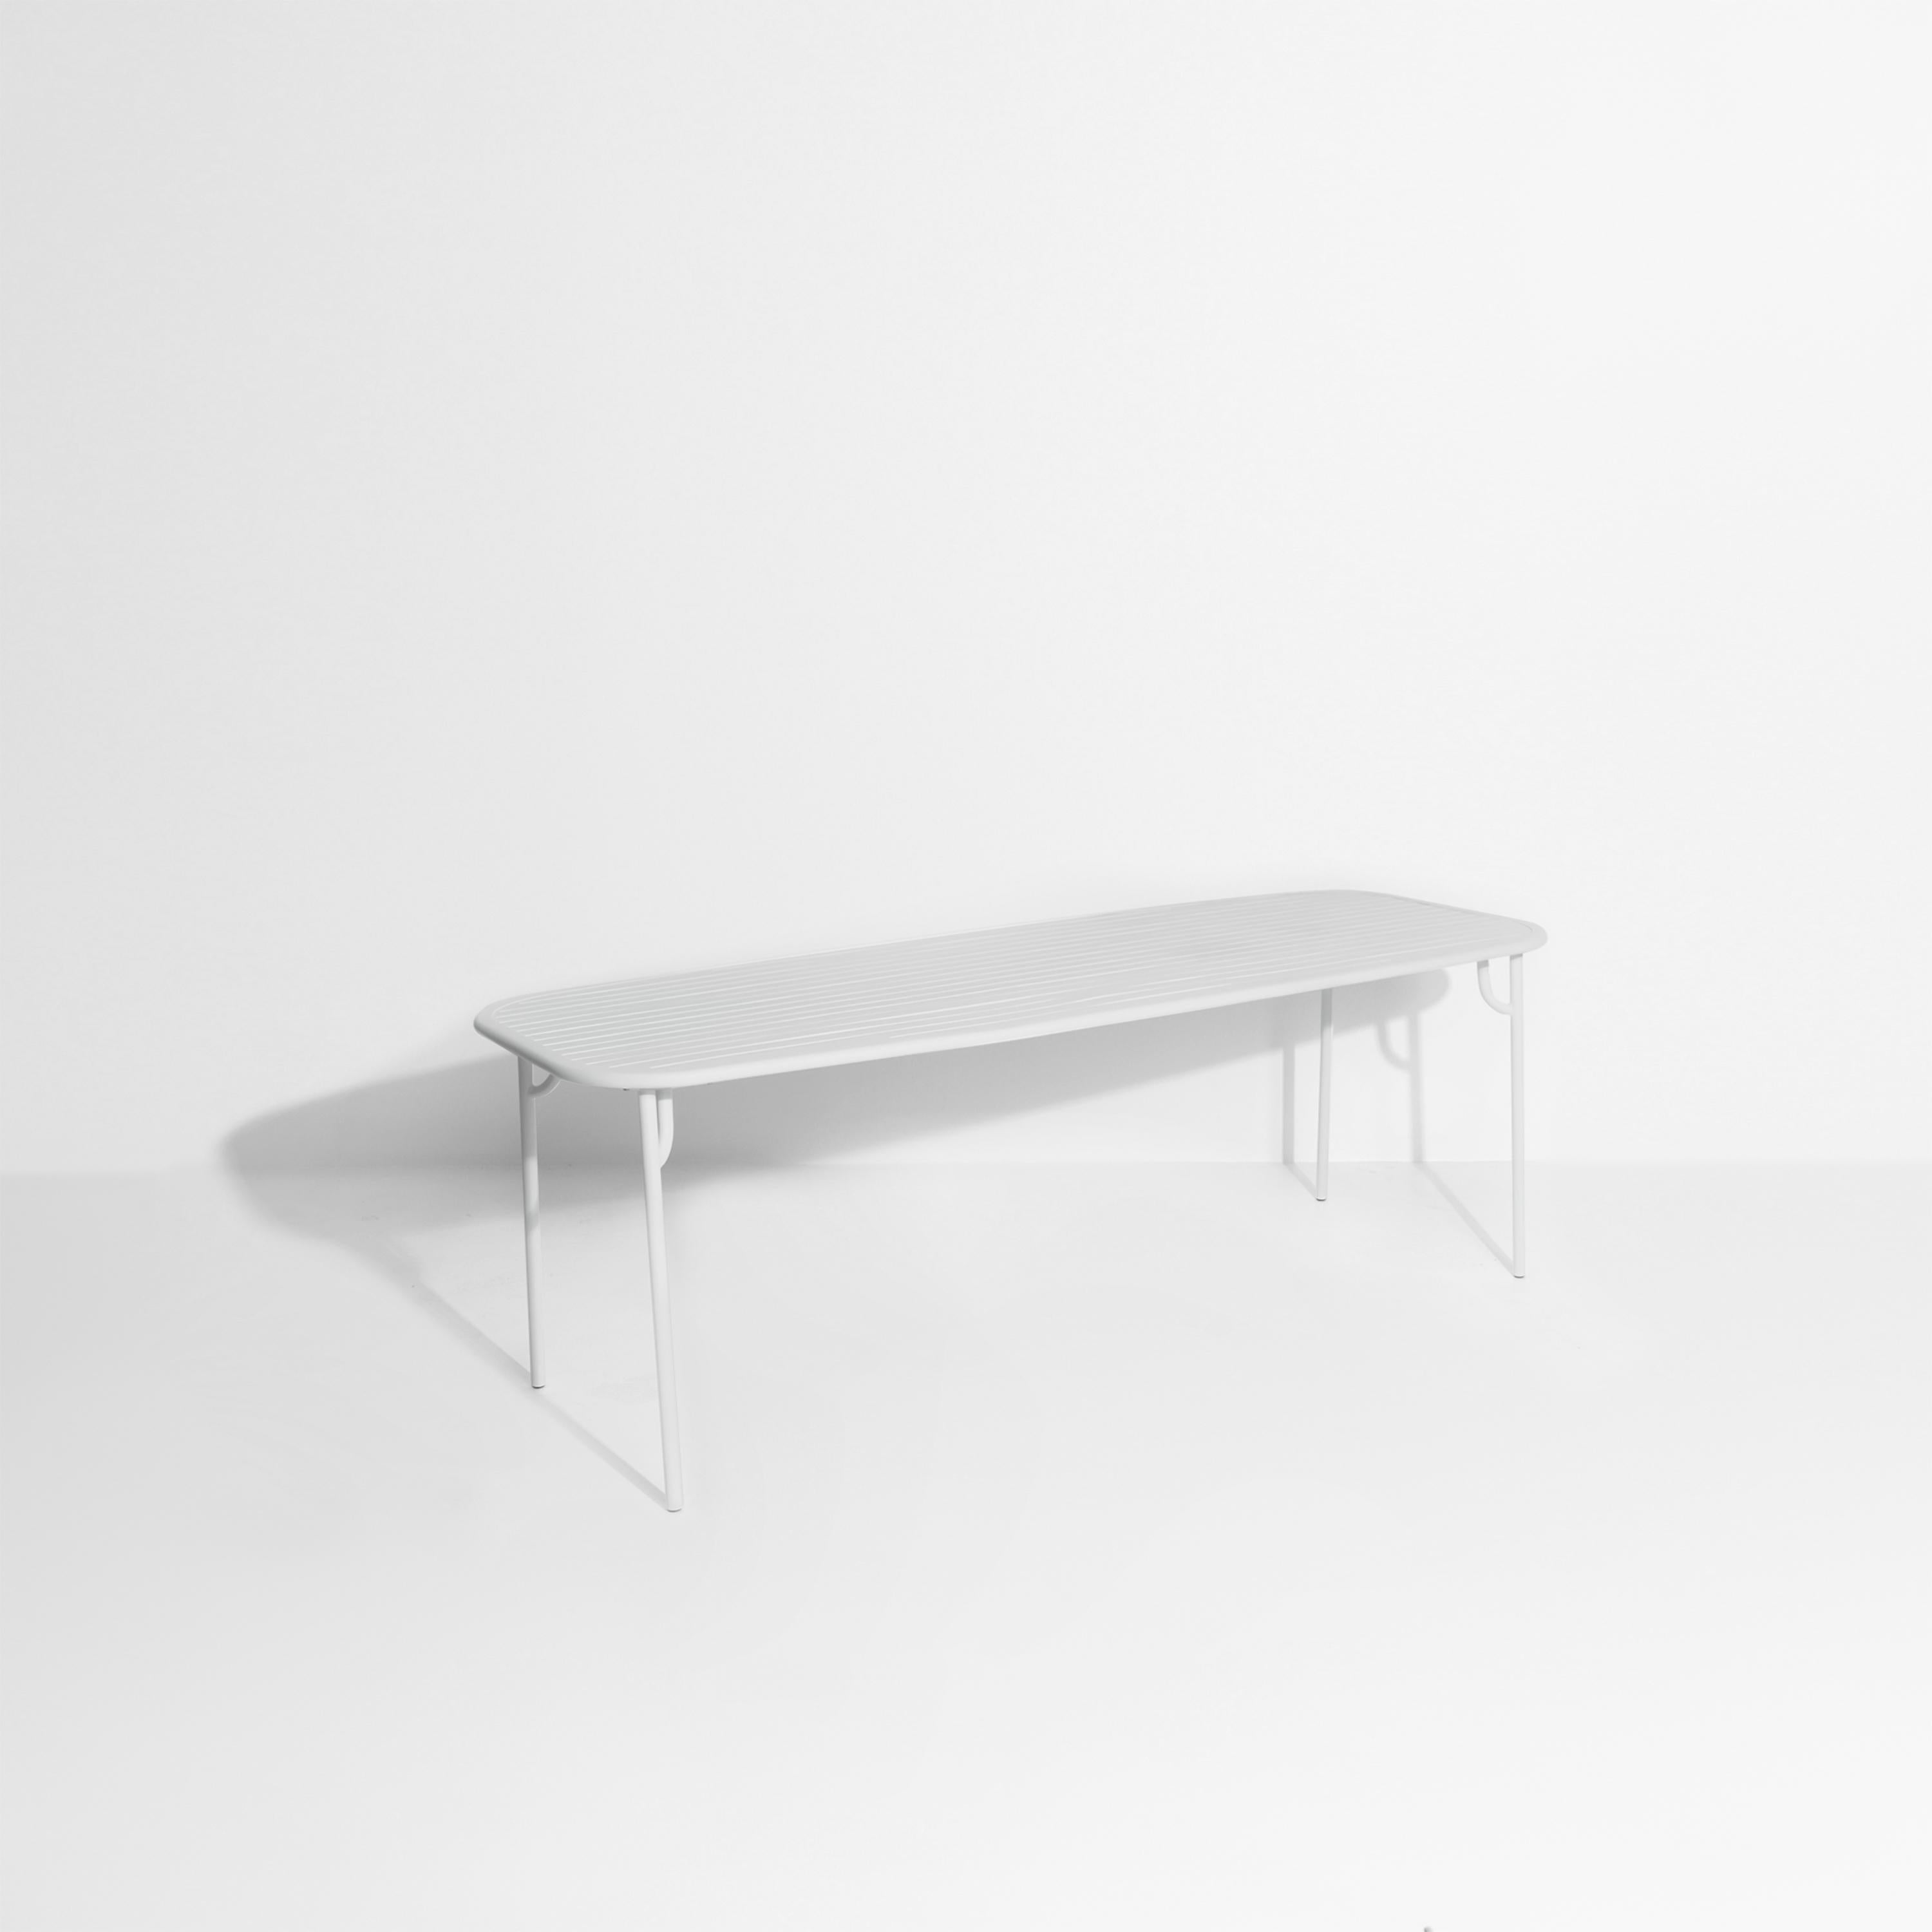 Petite Friture Week-End Large Rectangular Dining Table in Pearl Grey Aluminium with Slats by Studio BrichetZiegler, 2017

The week-end collection is a full range of outdoor furniture, in aluminium grained epoxy paint, matt finish, that includes 18